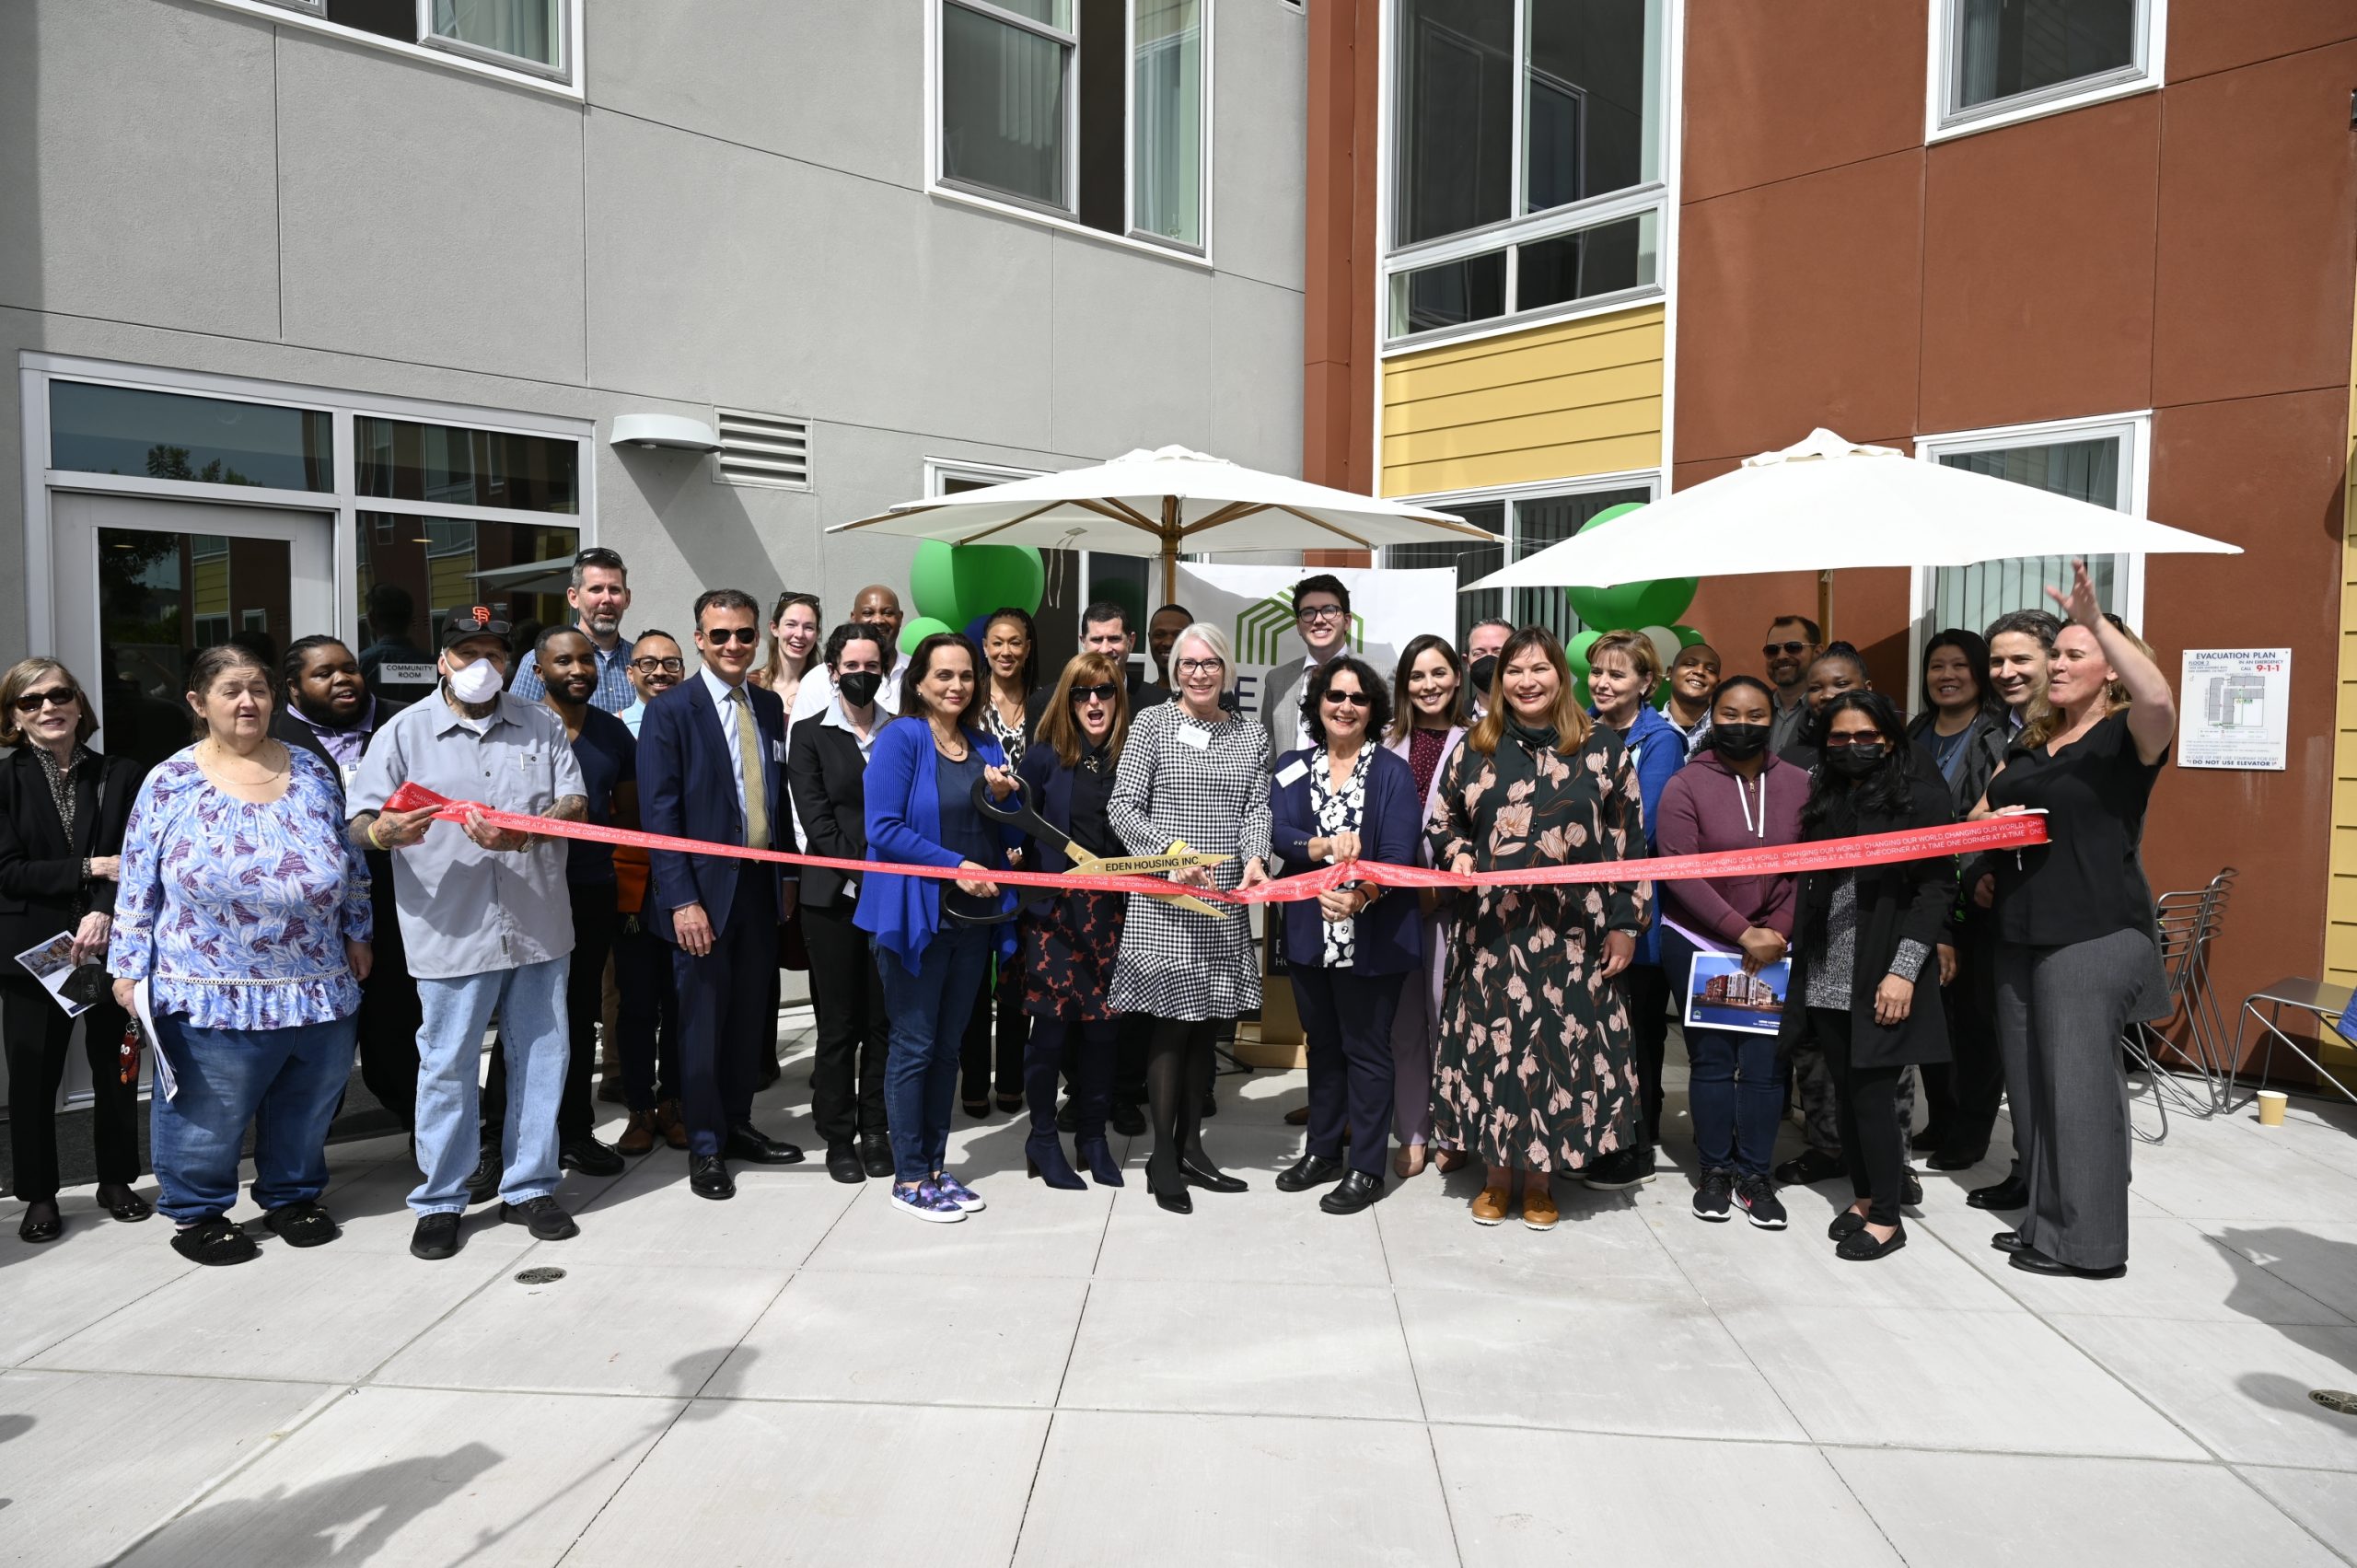 BBI Announces the Grand Opening of Loro Landing: 62 Units of Affordable Housing